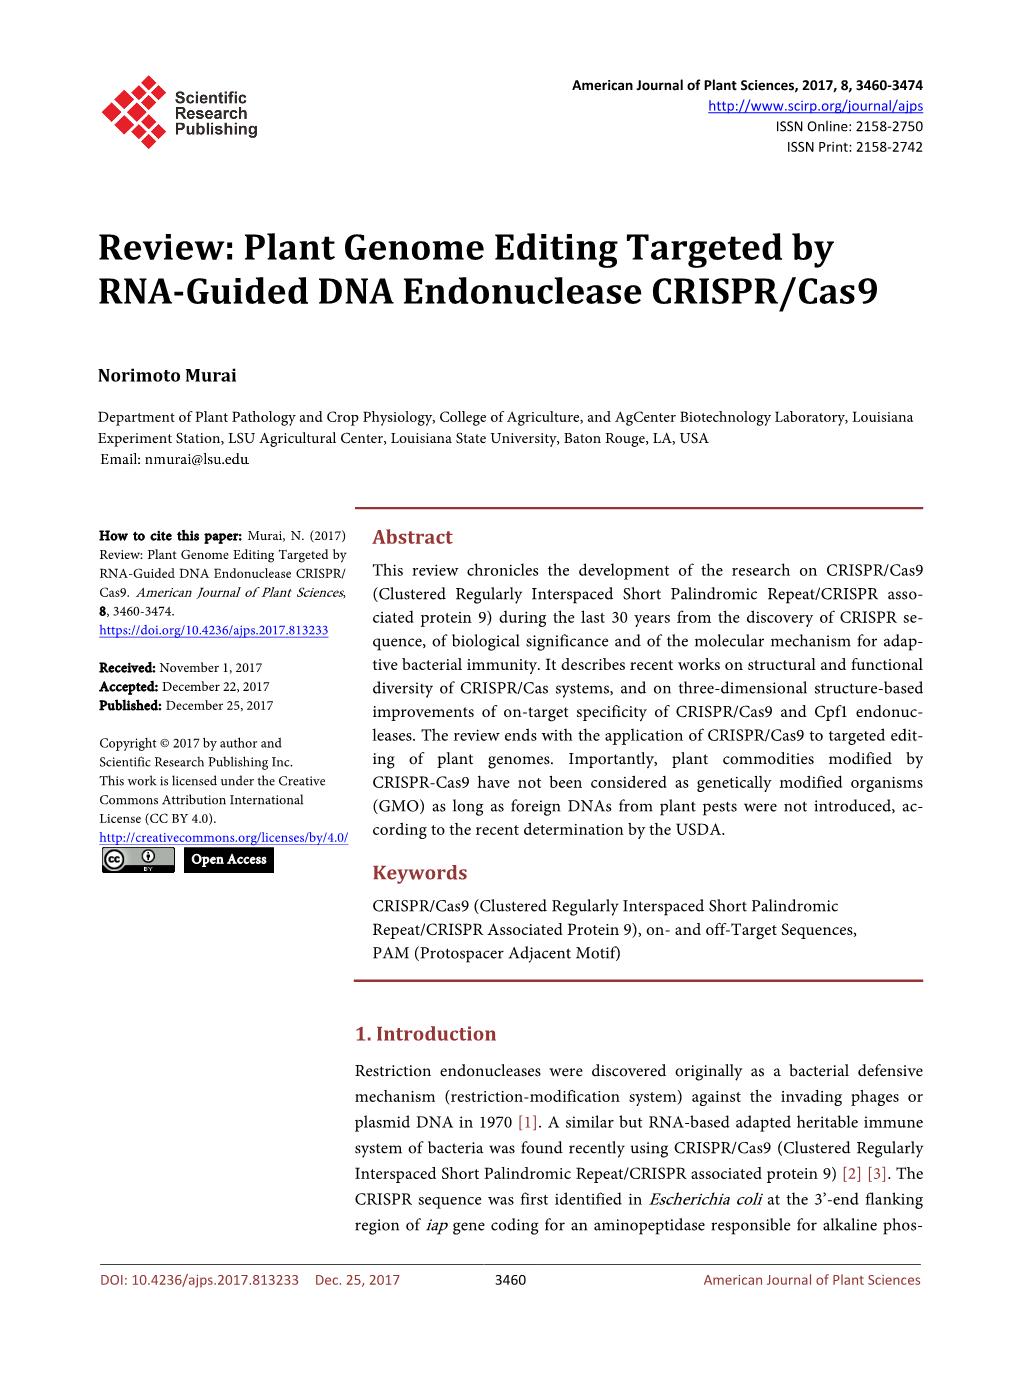 Plant Genome Editing Targeted by RNA-Guided DNA Endonuclease CRISPR/Cas9